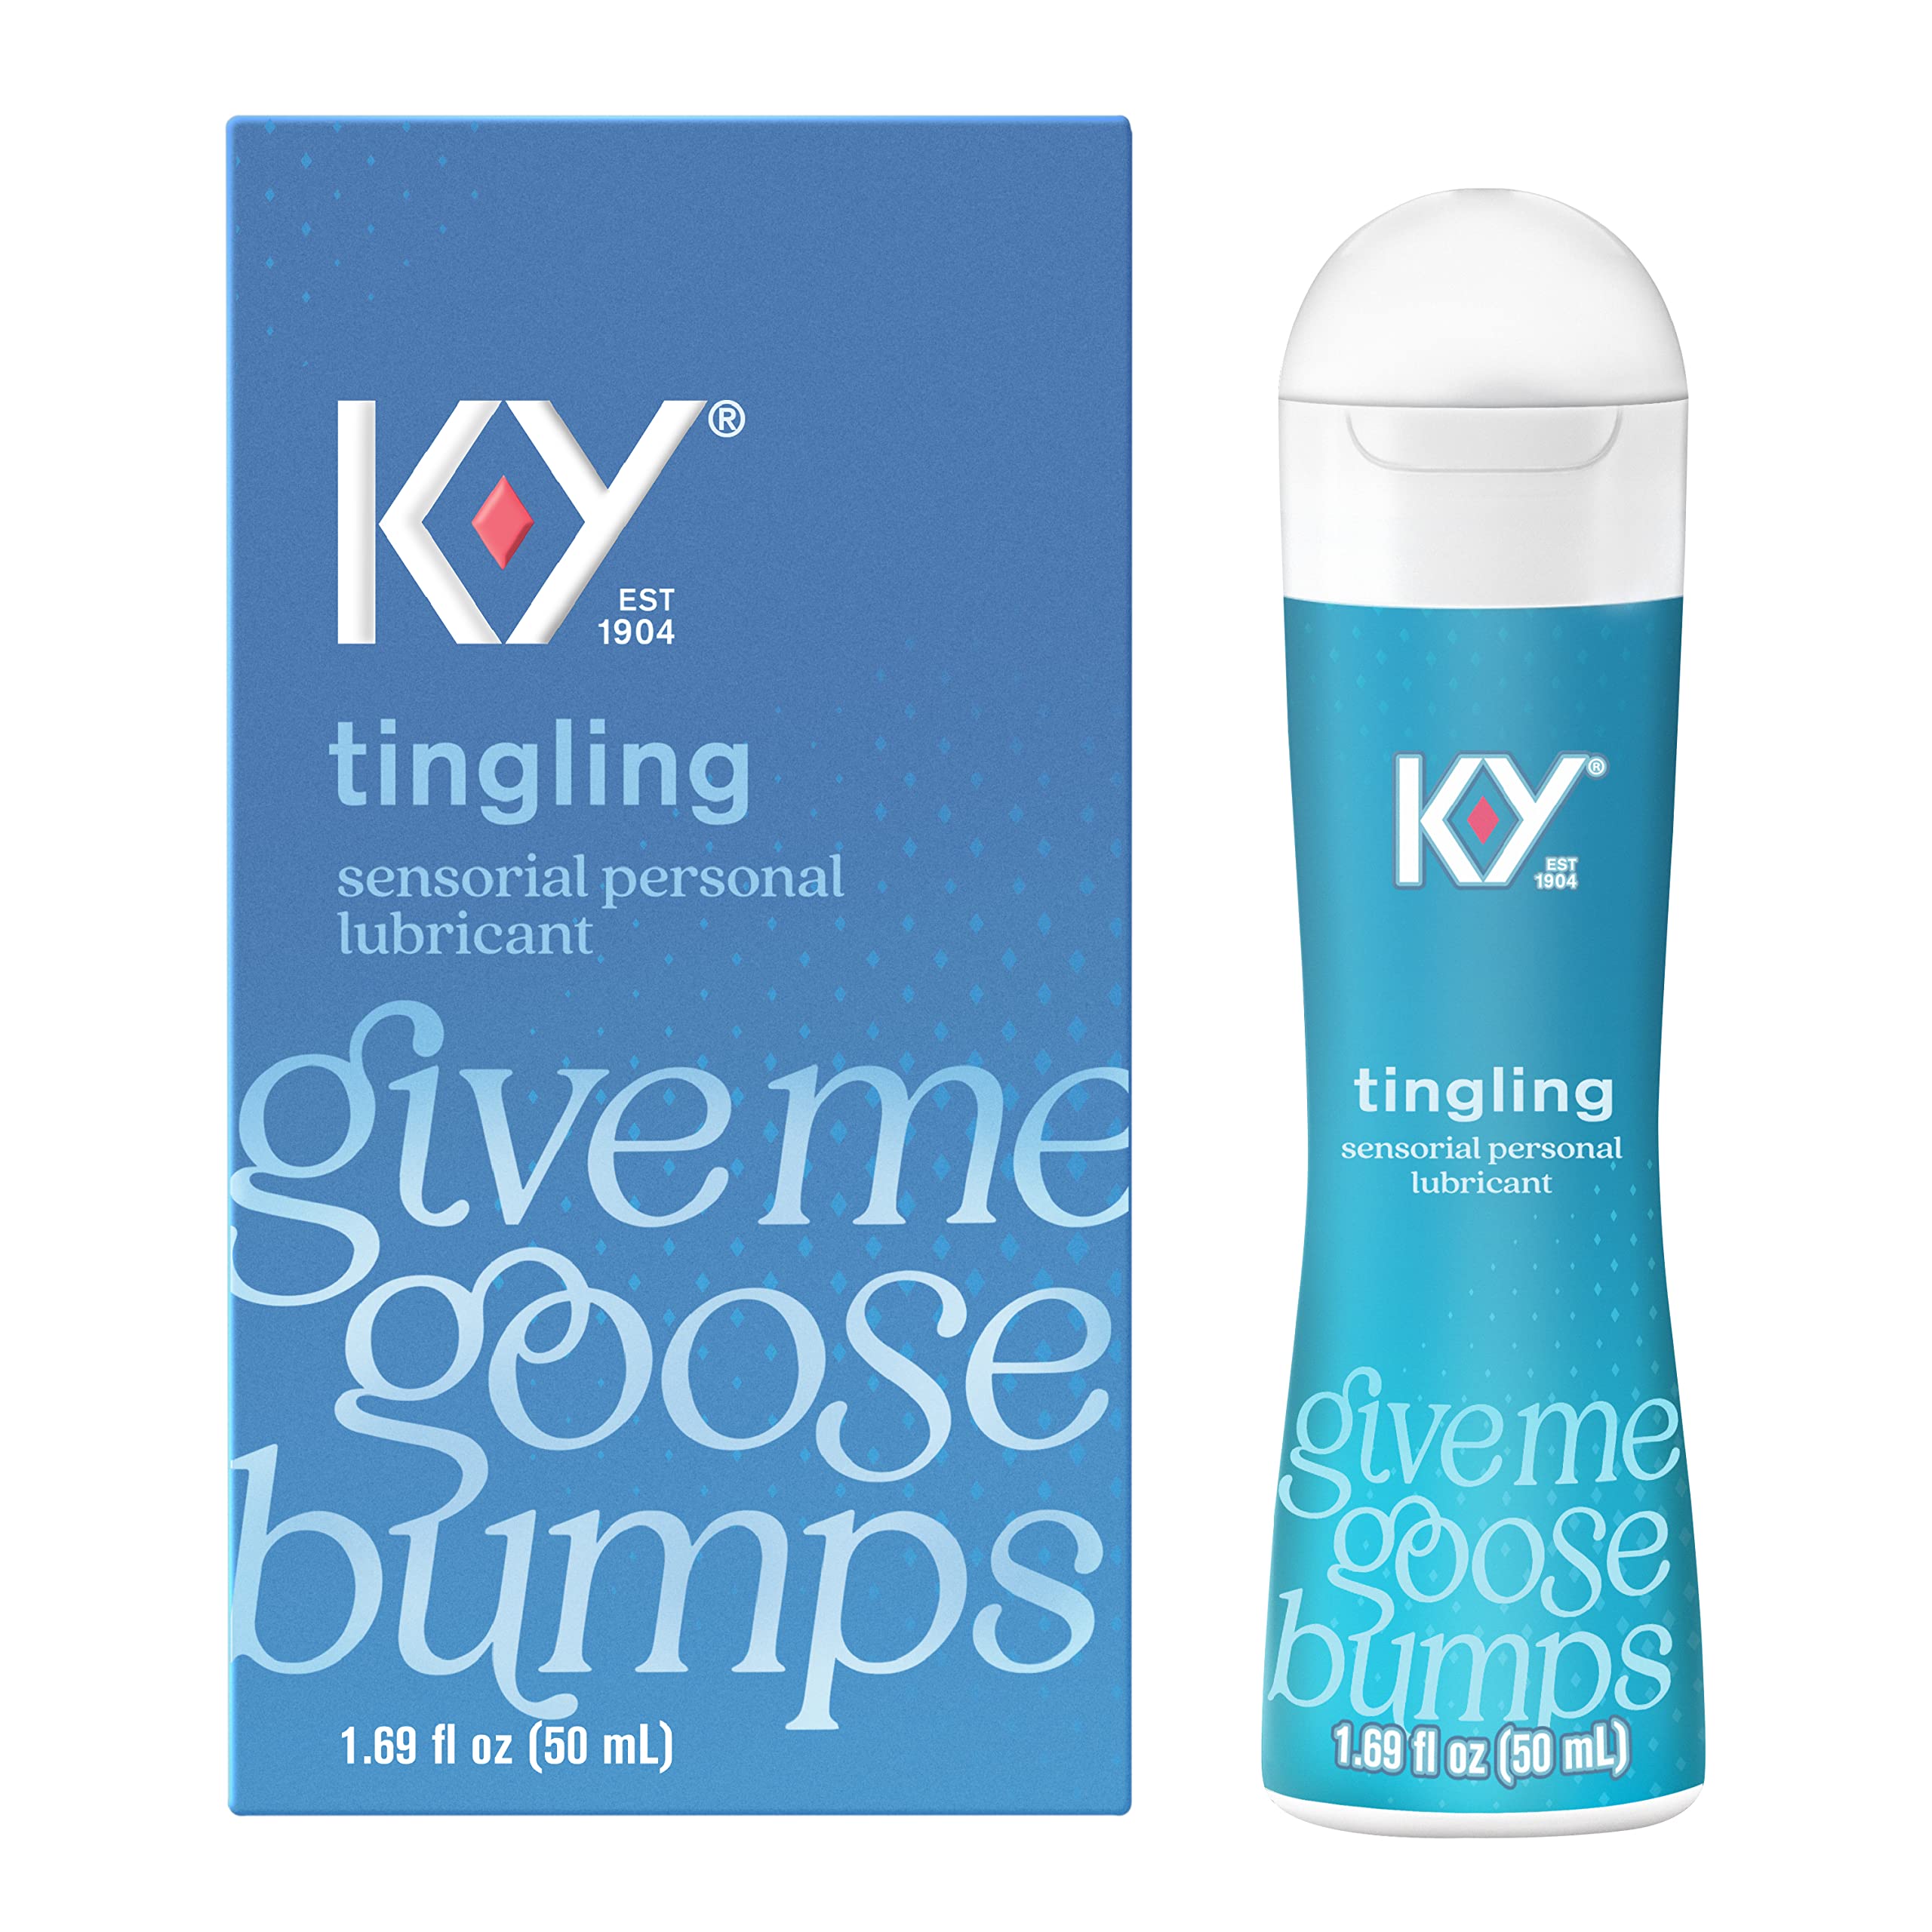 K-Y Water Based Lube Tingling 1.69 fl oz Personal Lubricant for Couples, Men, Women, Vaginal Moisturizer, pH Balanced, Paraben Free, Non-Greasy